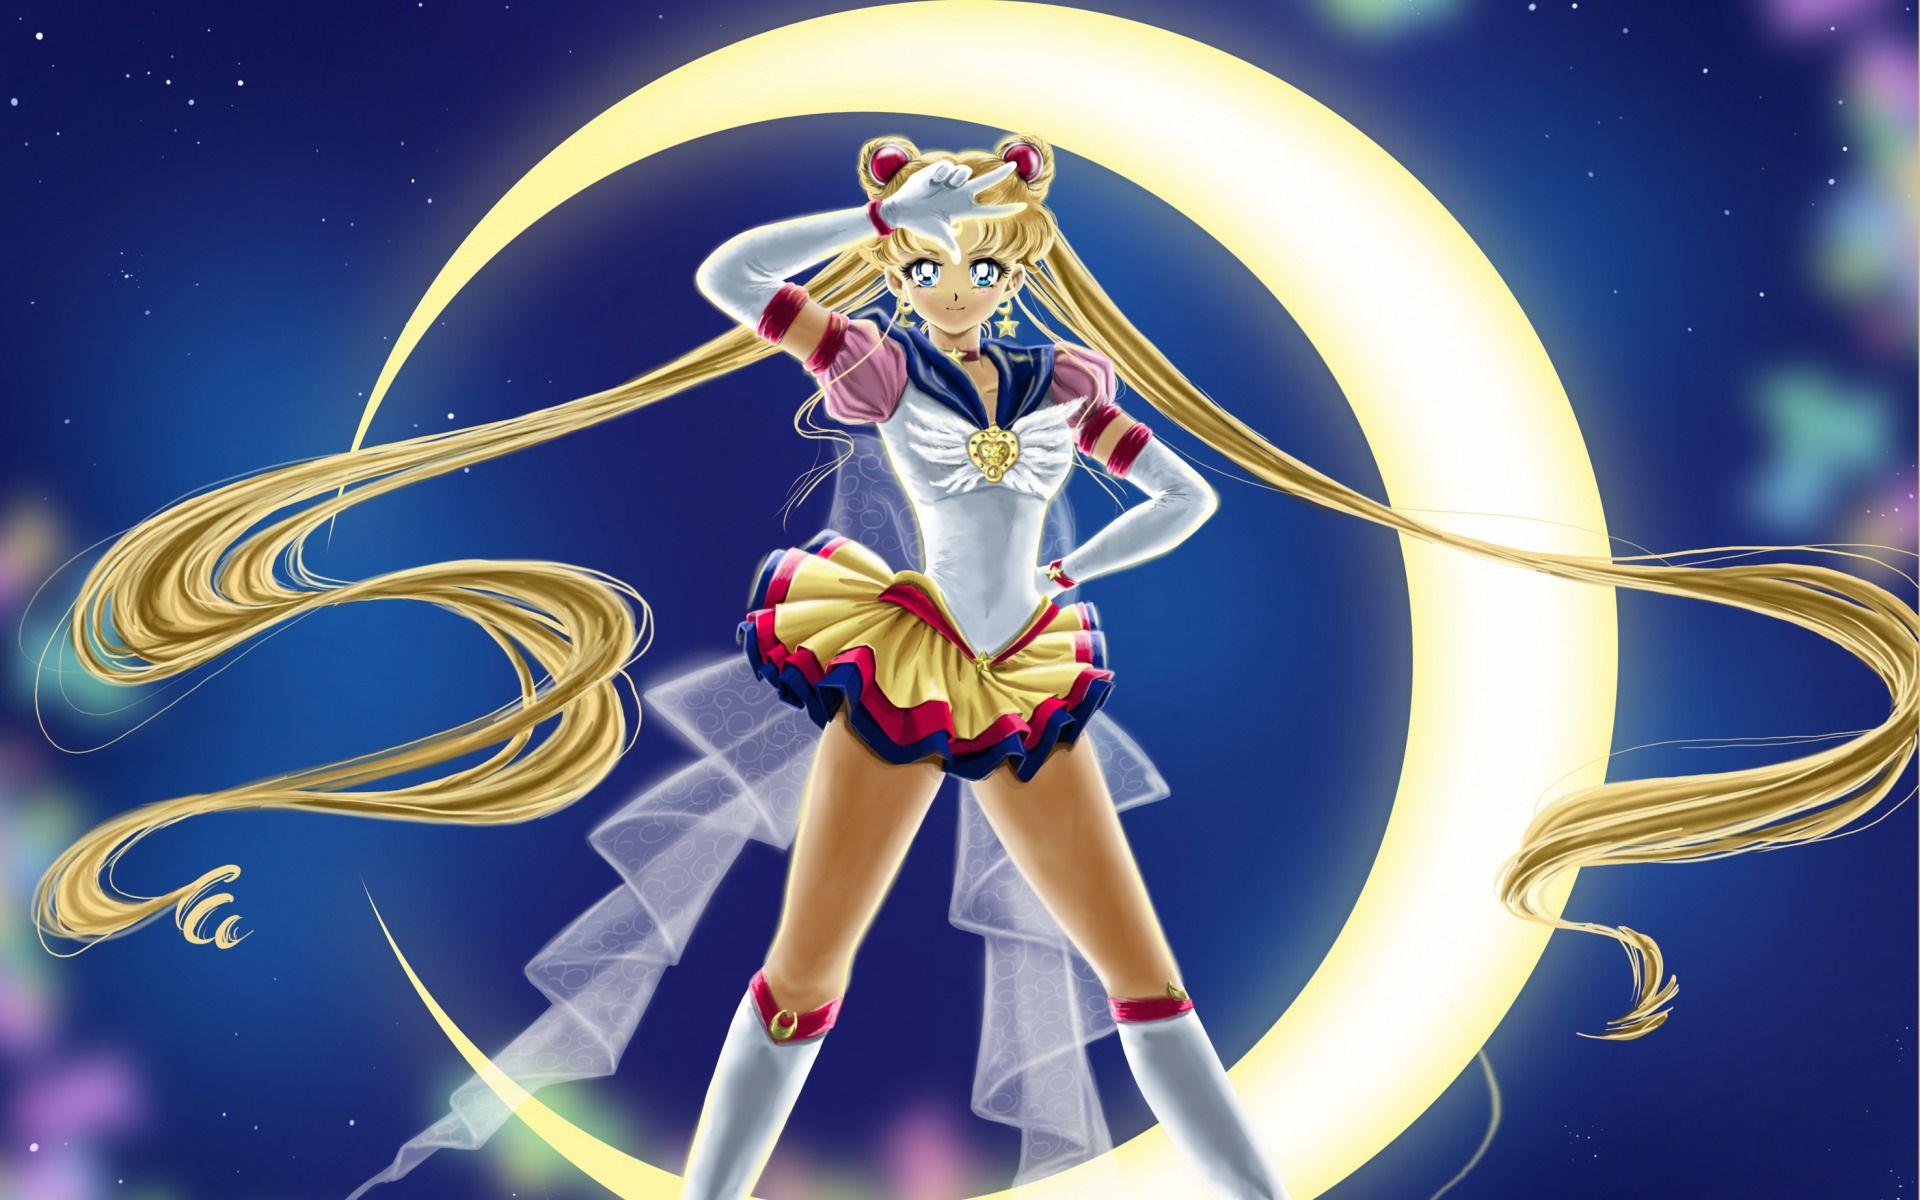 Sailor Moon Wallpapers Hd Image Gallery.